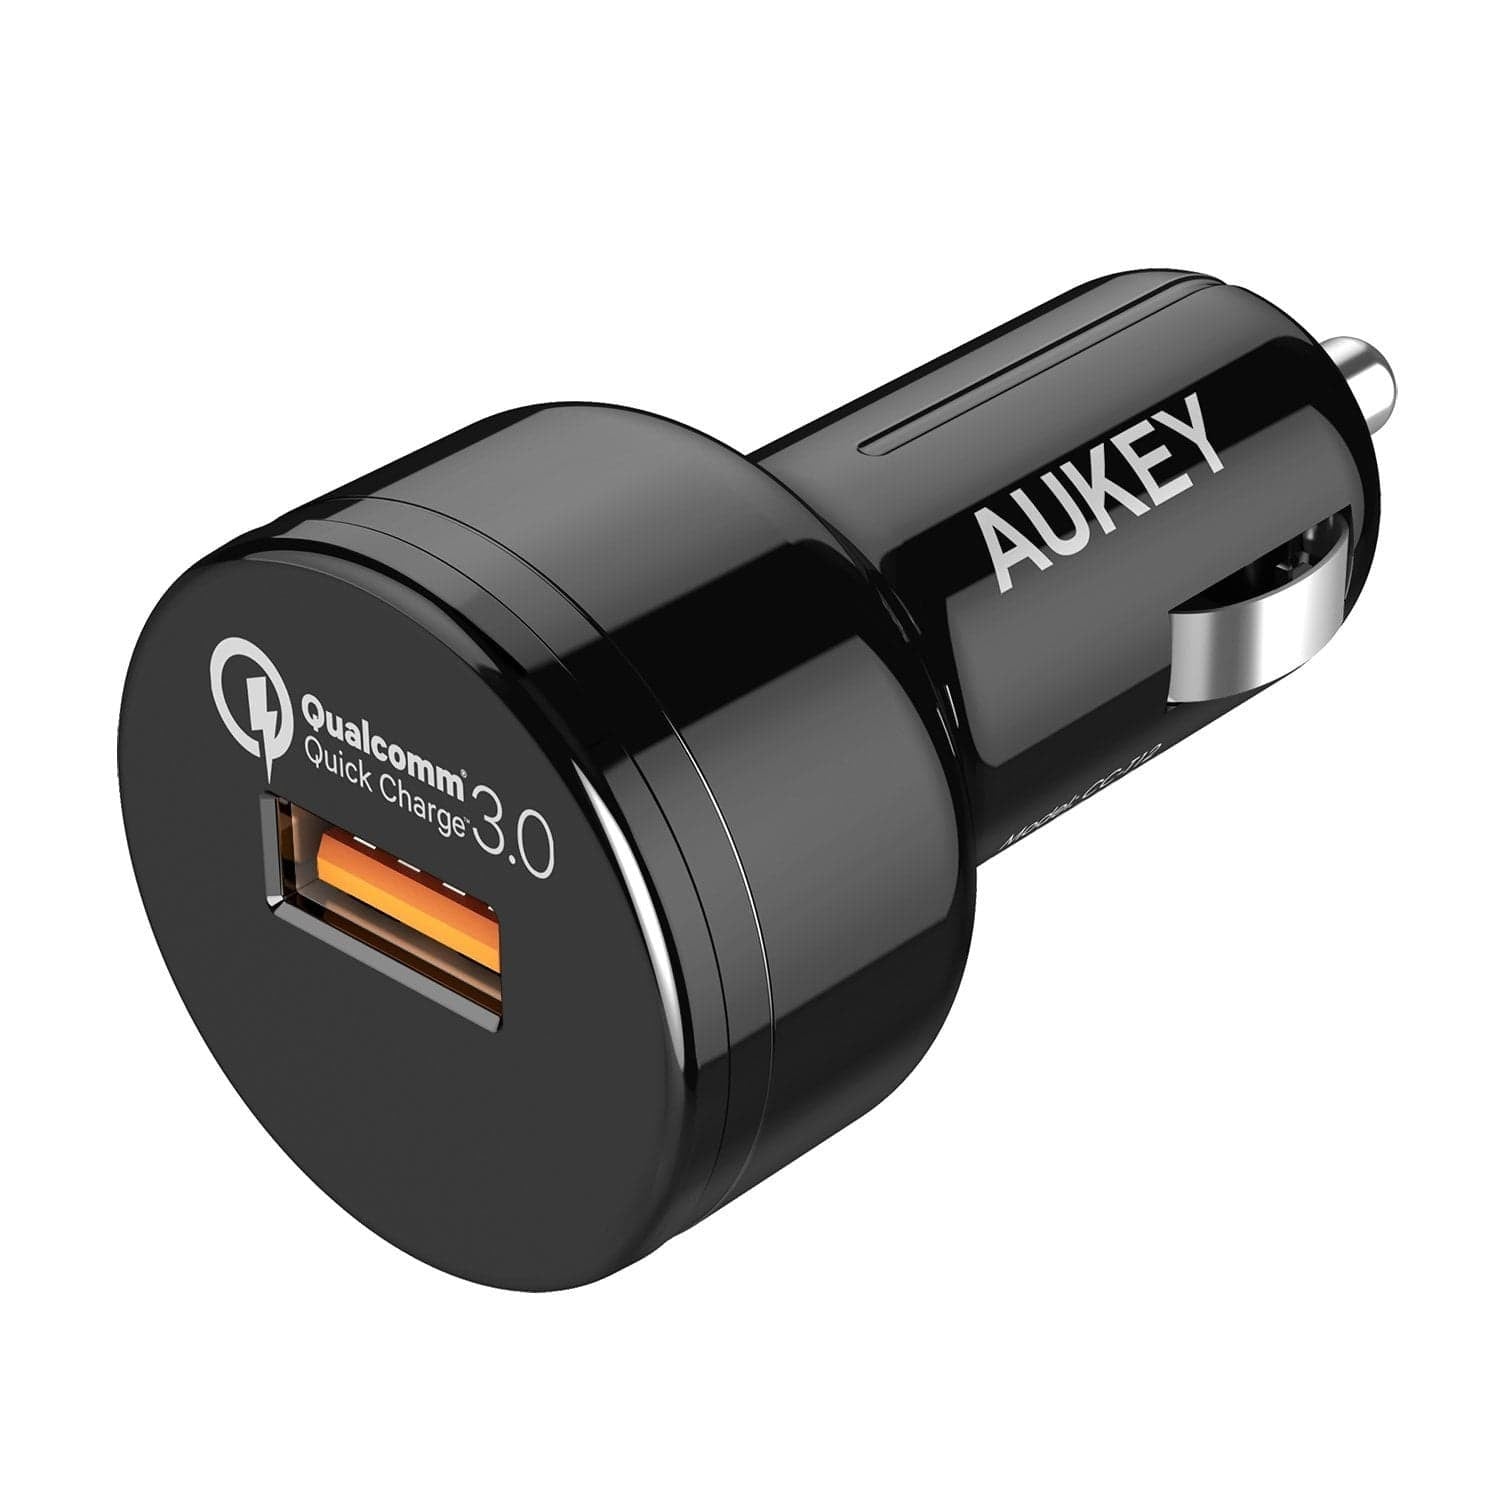 AUKEY CC-T12 24W Single Port Qualcomm Quick Charge 3.0 Car Charger - Aukey Malaysia Official Store